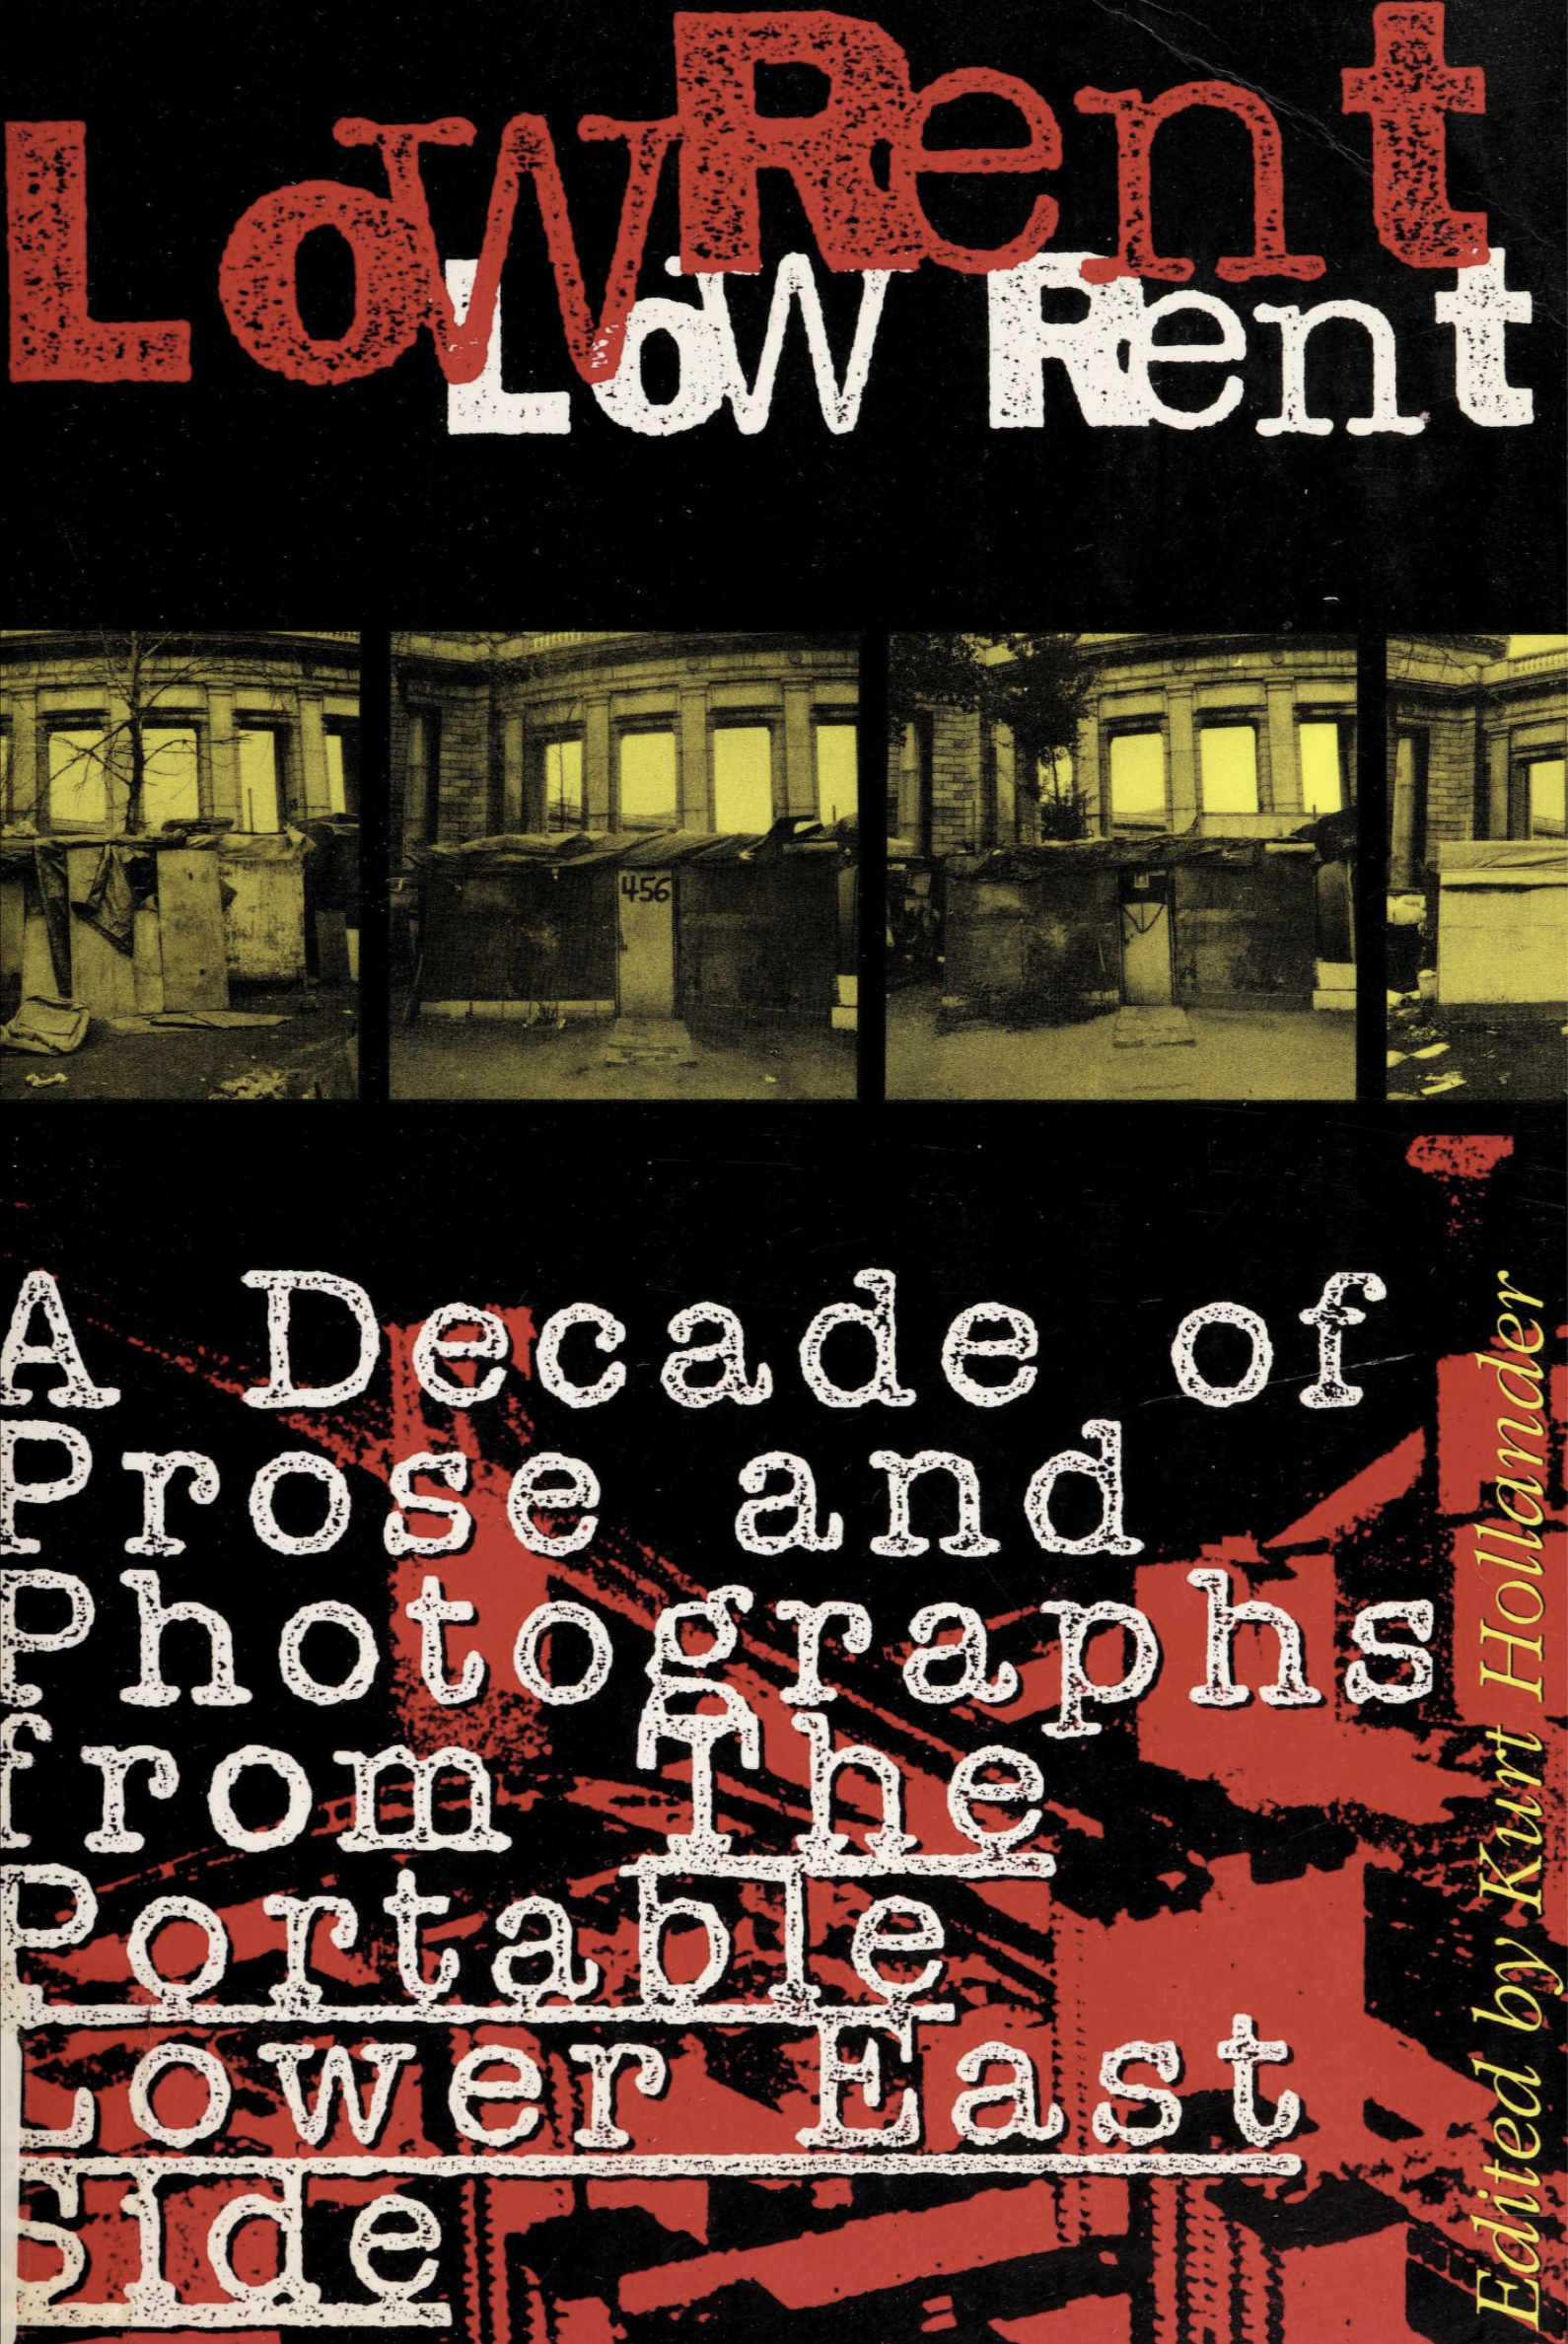 «Low Rent: a decade of prose and photographs from the portable lower east side»